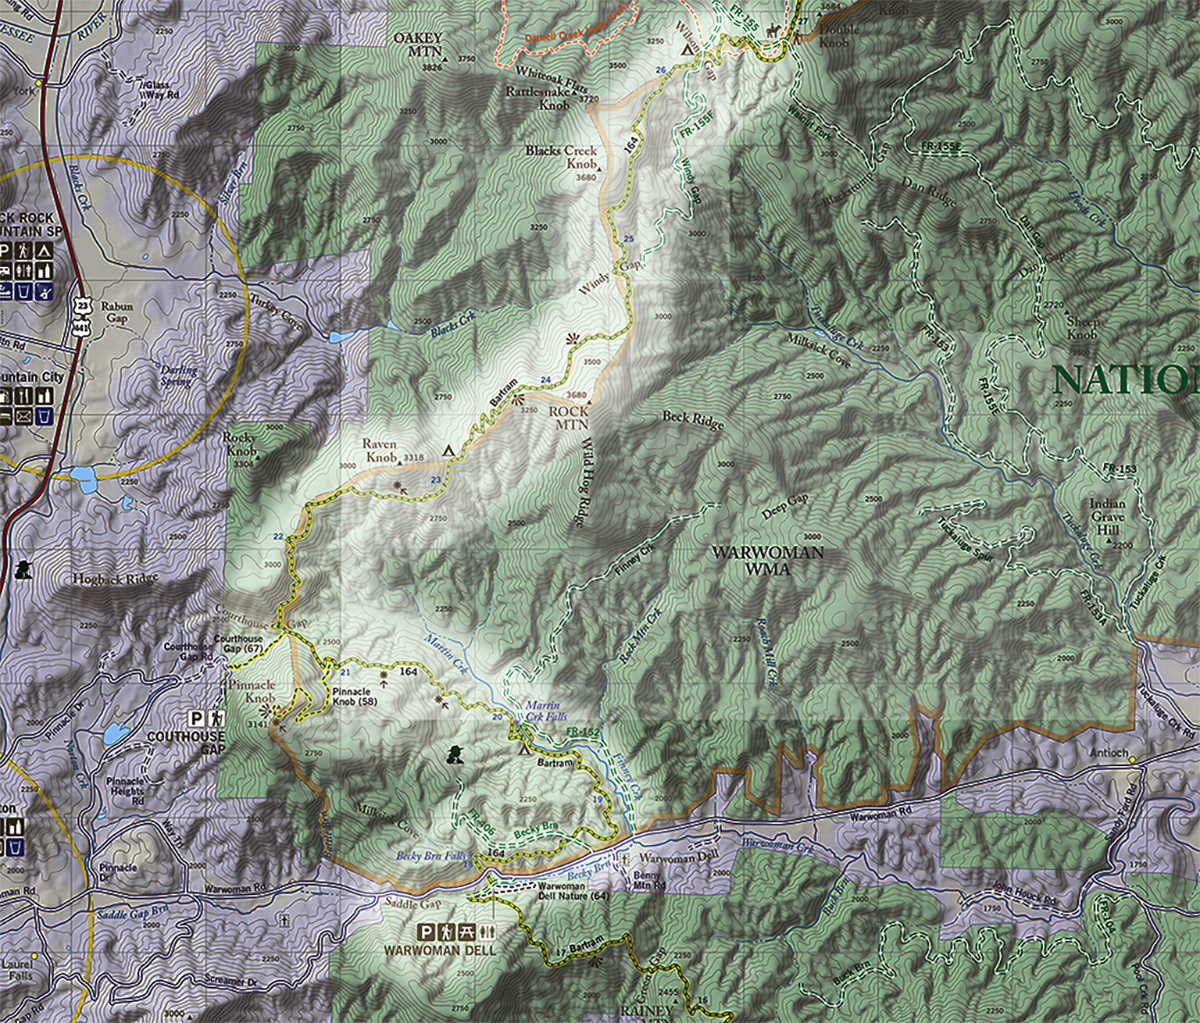 Map excerpt of the Bartram Trail Section 3: Warwoman Dell to Wilson Gap